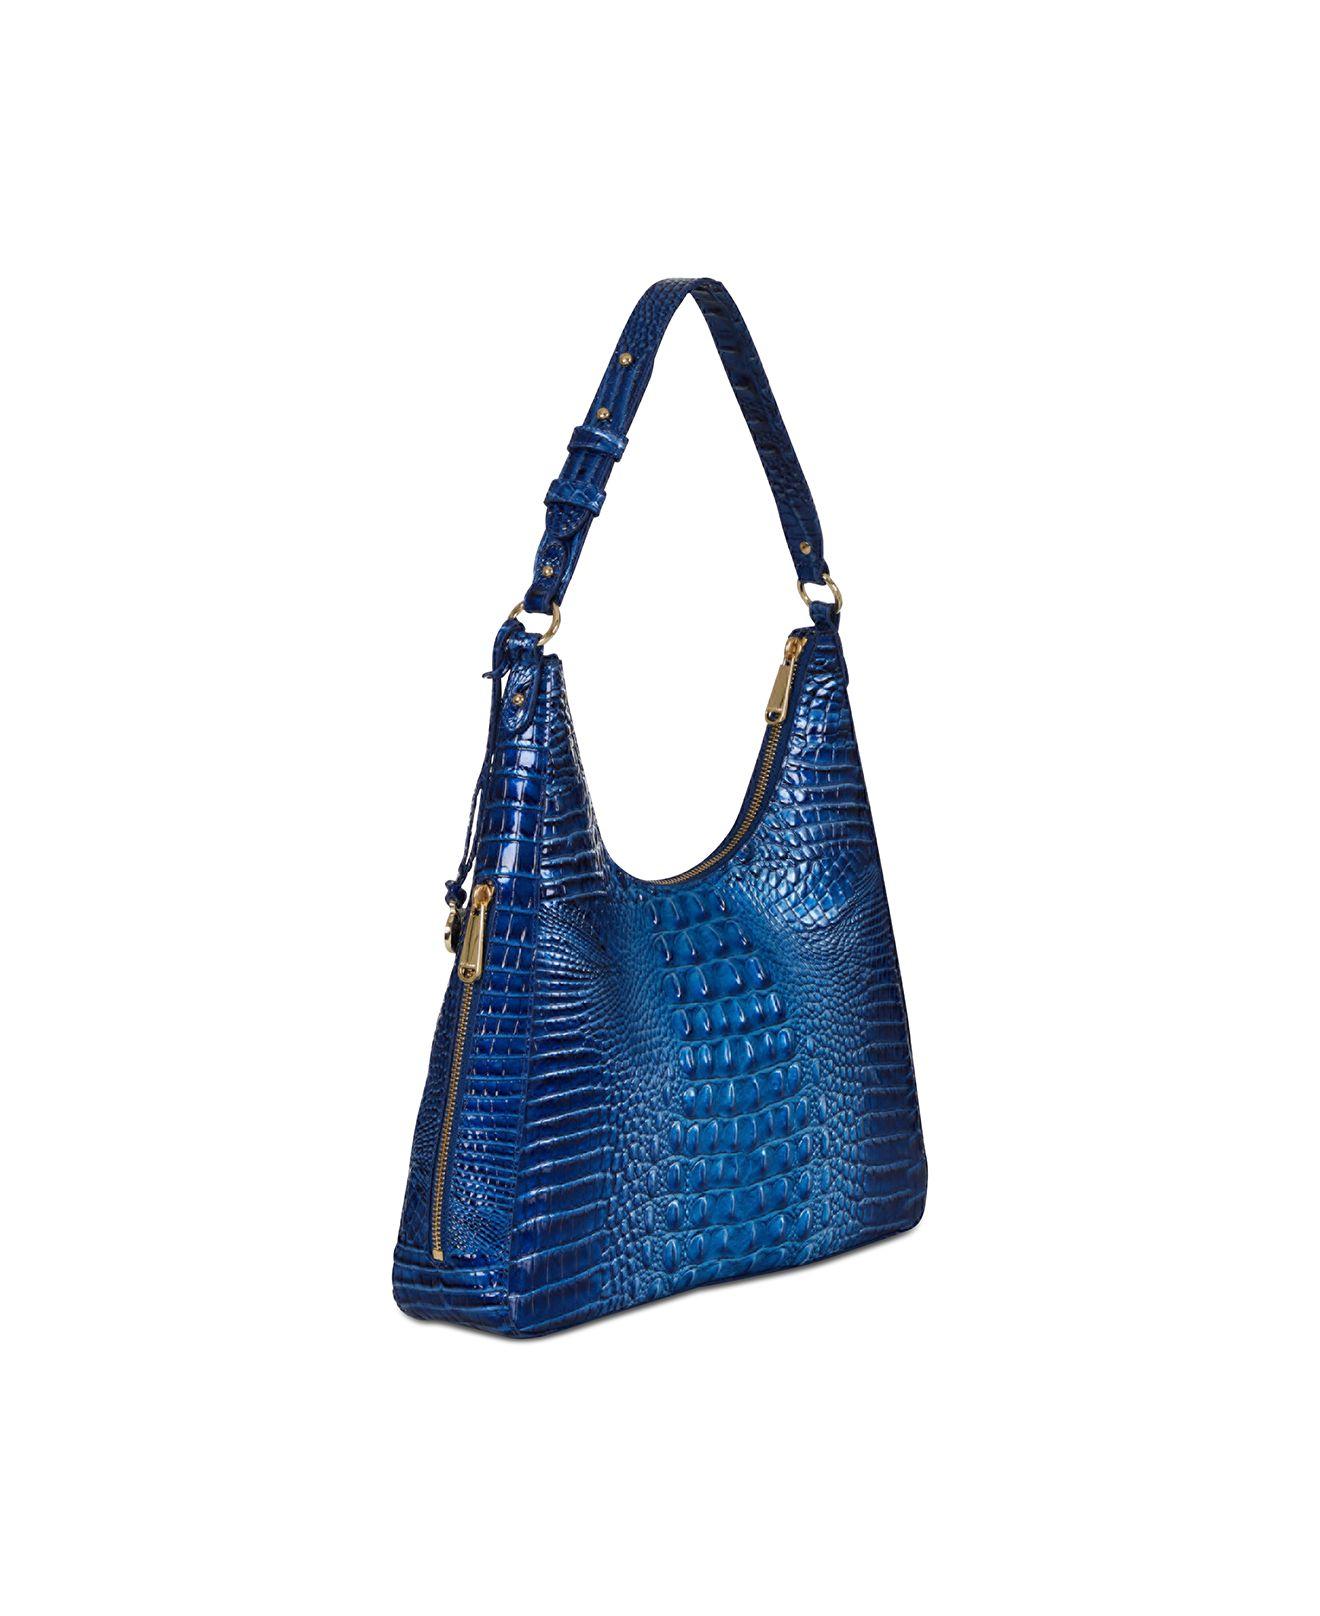 Brahmin - Authenticated Handbag - Leather Blue Snakeskin for Women, Never Worn, with Tag